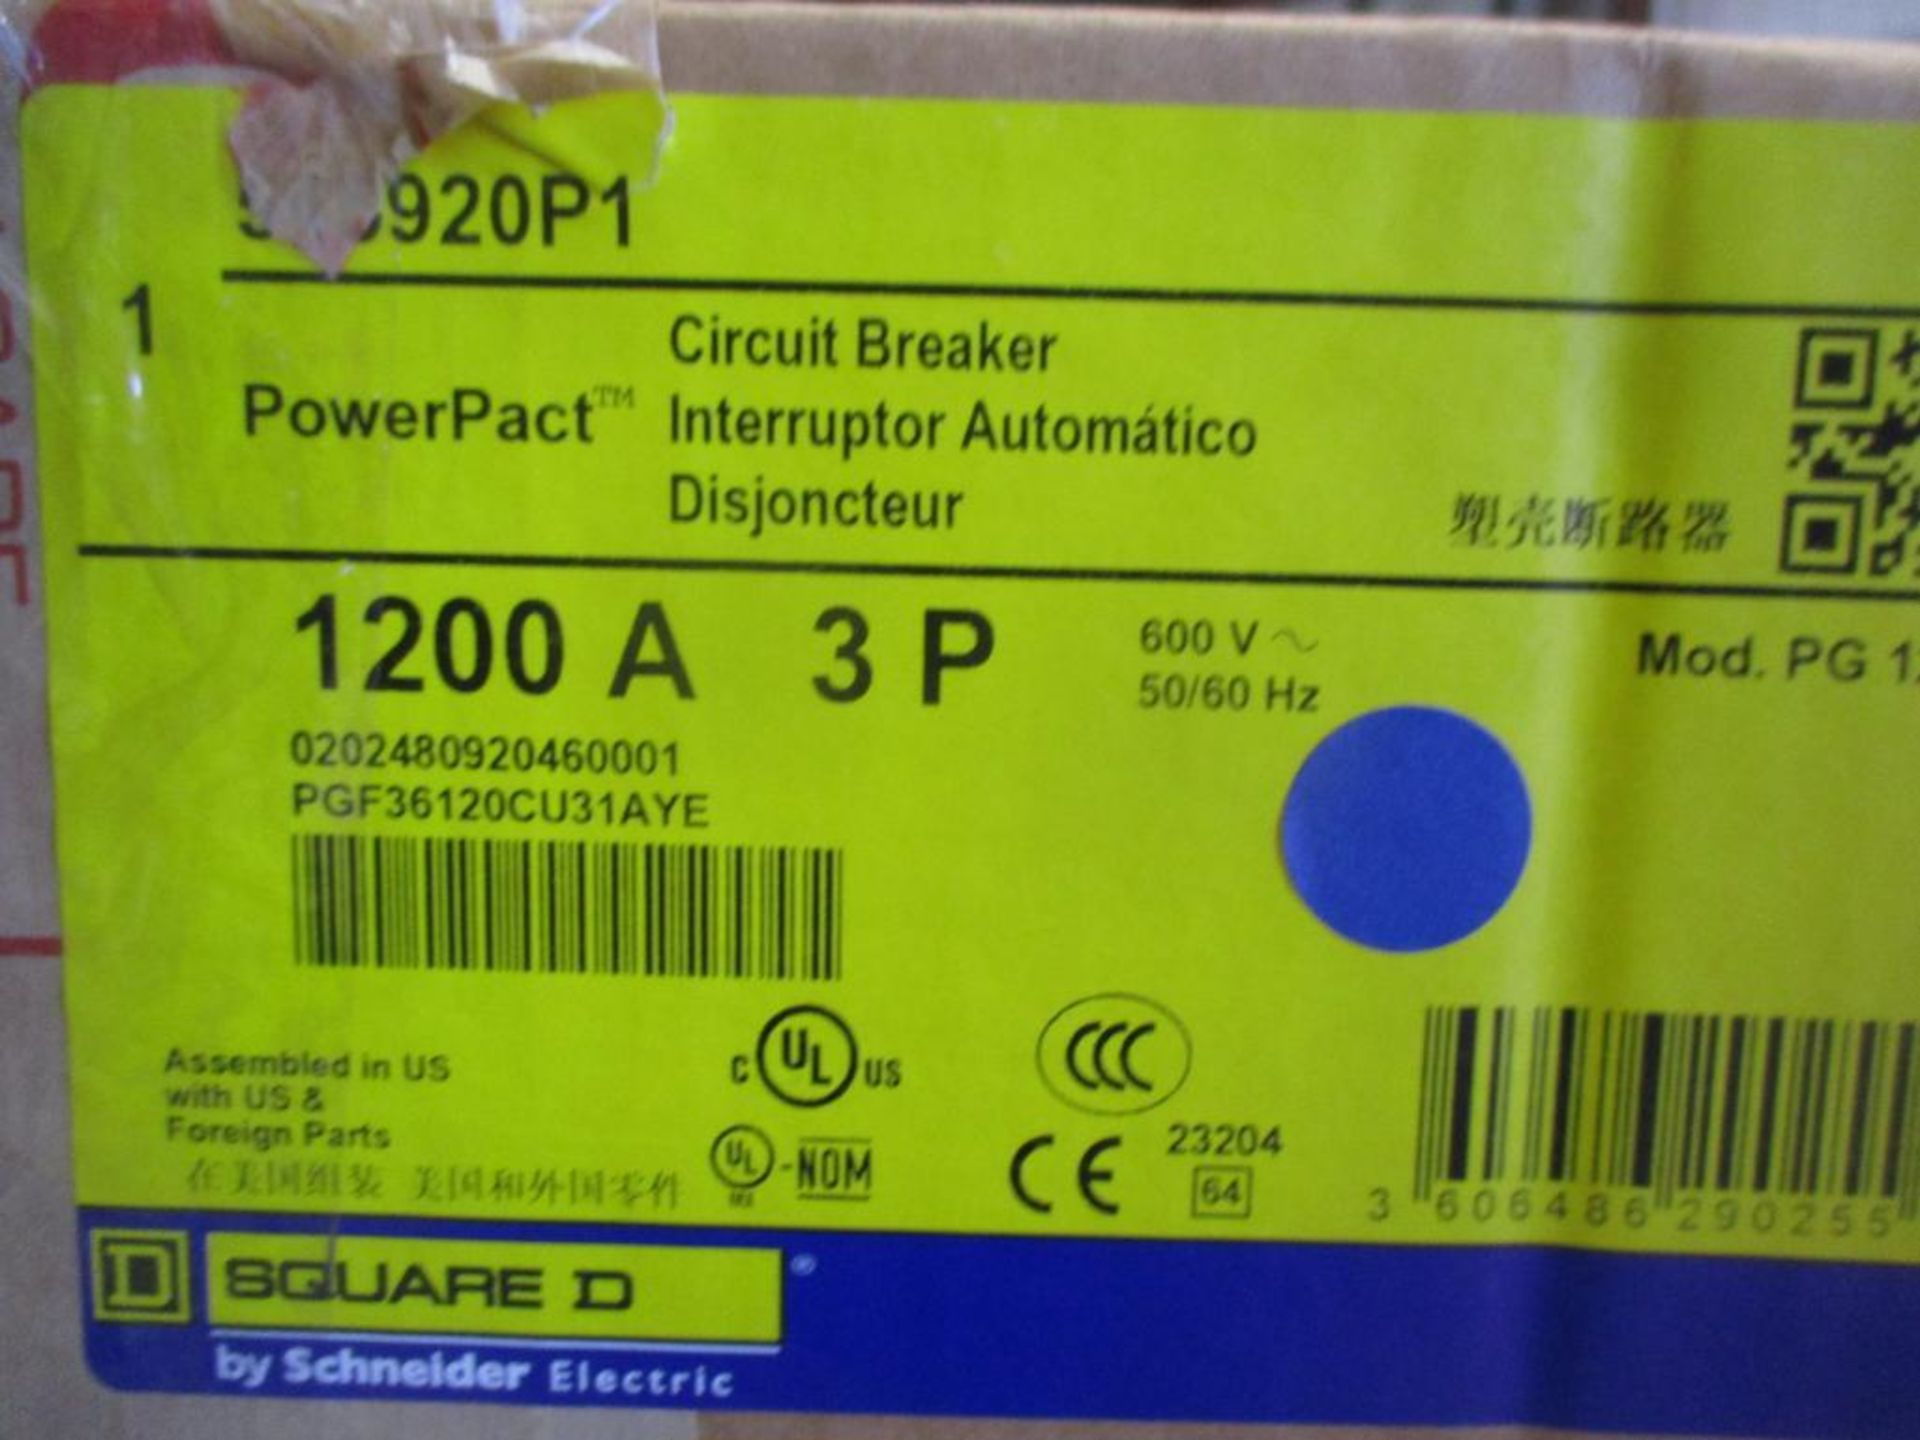 Square D 1200 AMP Circuit Breaker, 545920P1, 1200A, 3P, 600VAC, PG1200 (New in Box) - Image 4 of 4